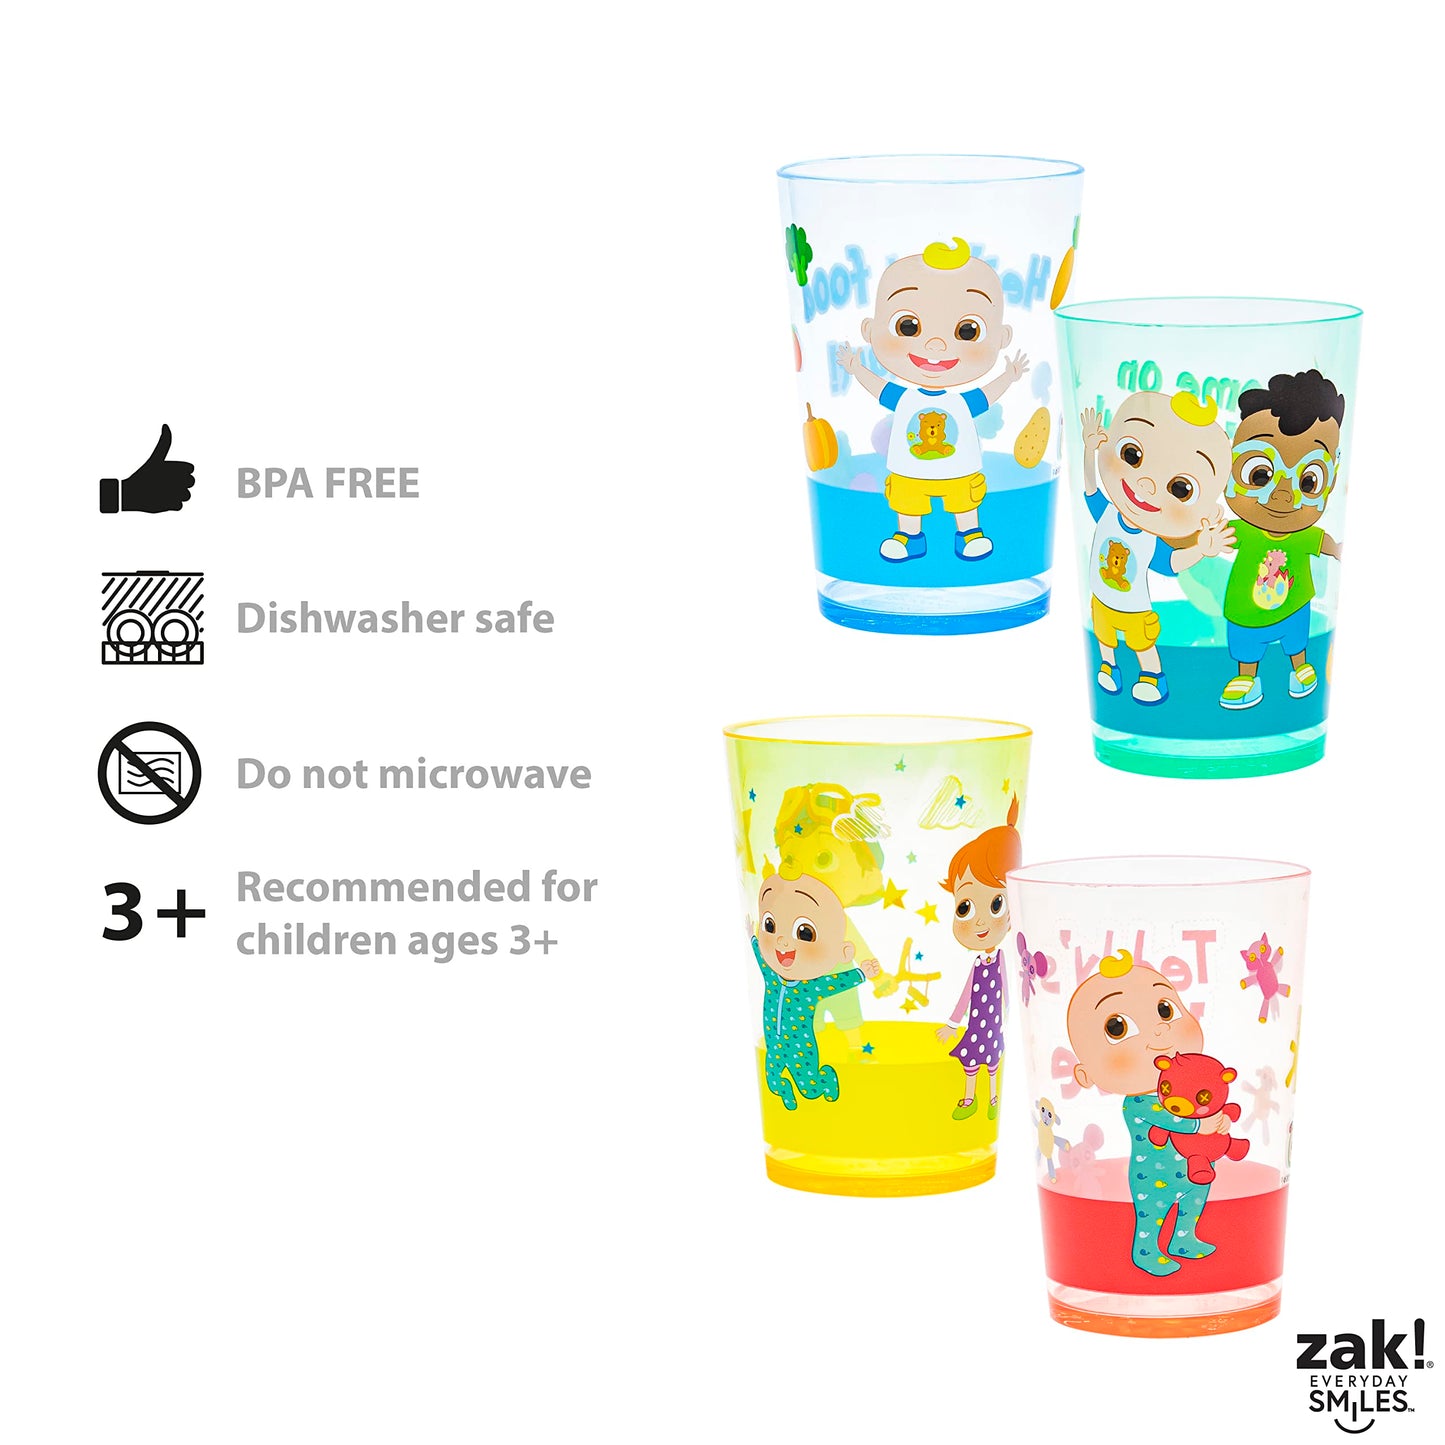 Zak Designs Bluey Nesting Tumbler Set Includes Durable Plastic Cups with Variety Artwork, Fun Drinkware is Perfect for Kids (14.5 oz, 4-Pack, Non-BPA)